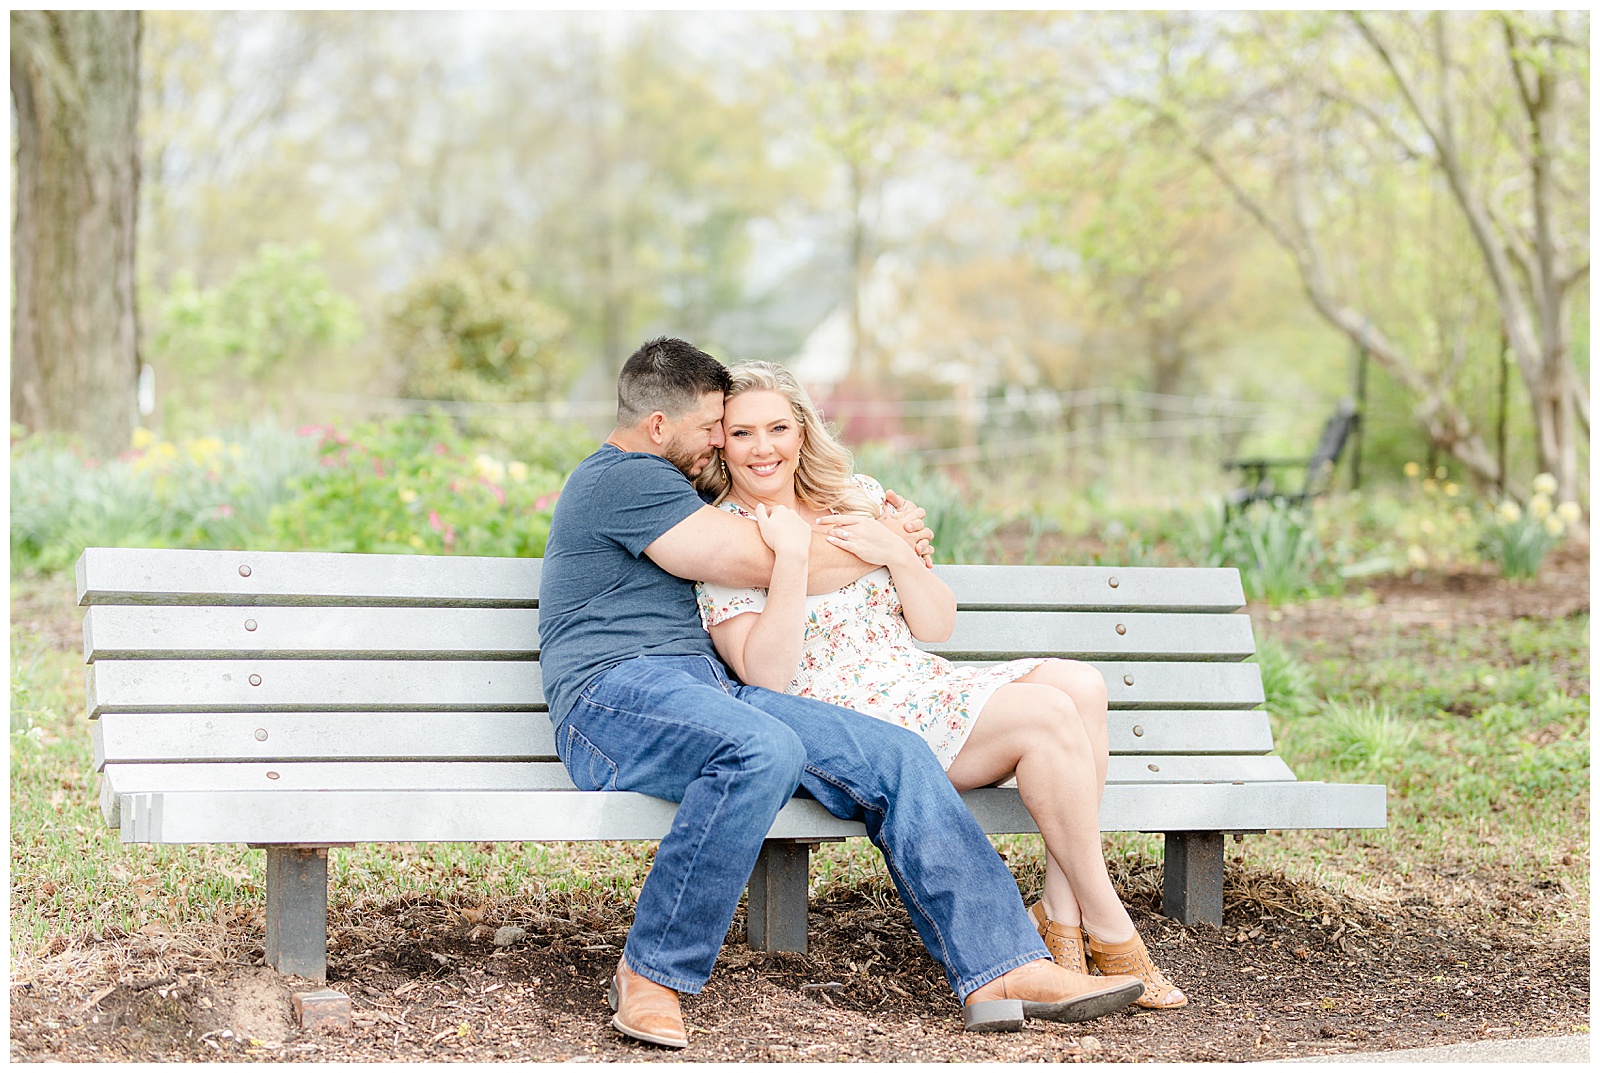 Queeny Park engagement session sitting on bench